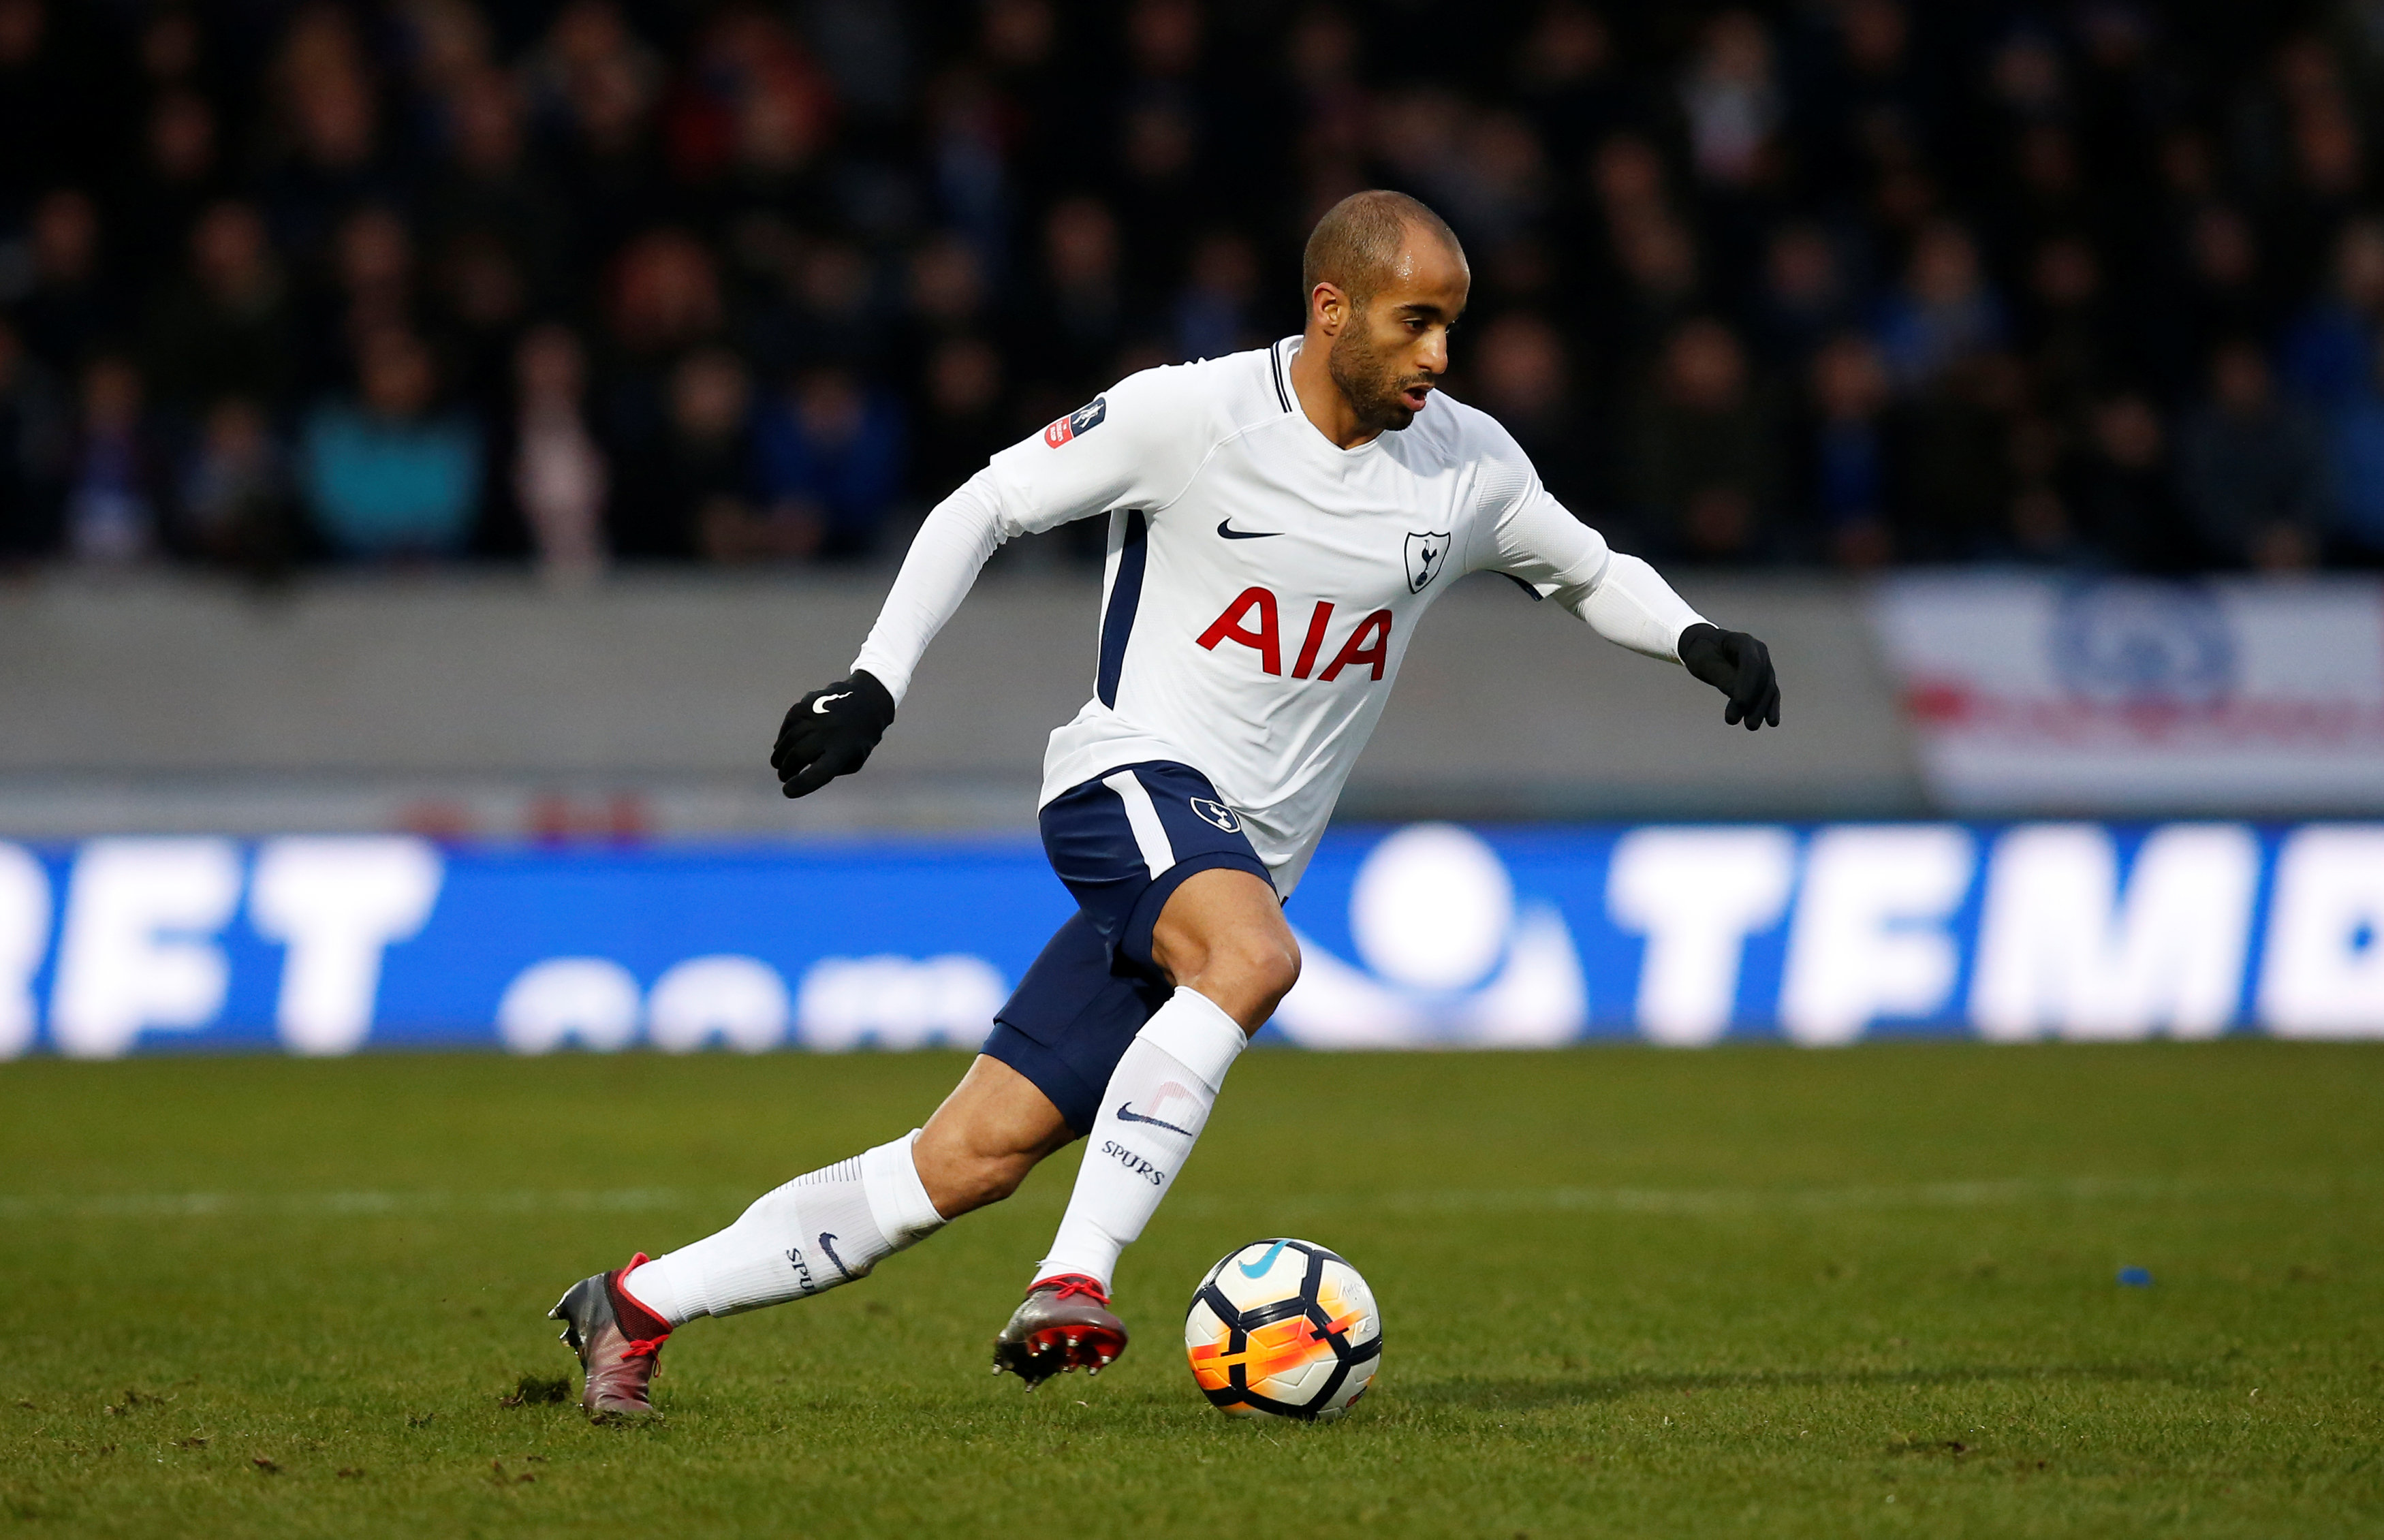 Soccer Football - FA Cup Fifth Round - Rochdale vs Tottenham Hotspur - The Crown Oil Arena, Rochdale, Britain - February 18, 2018   Tottenham's Lucas Moura in action        REUTERS/Andrew Yates